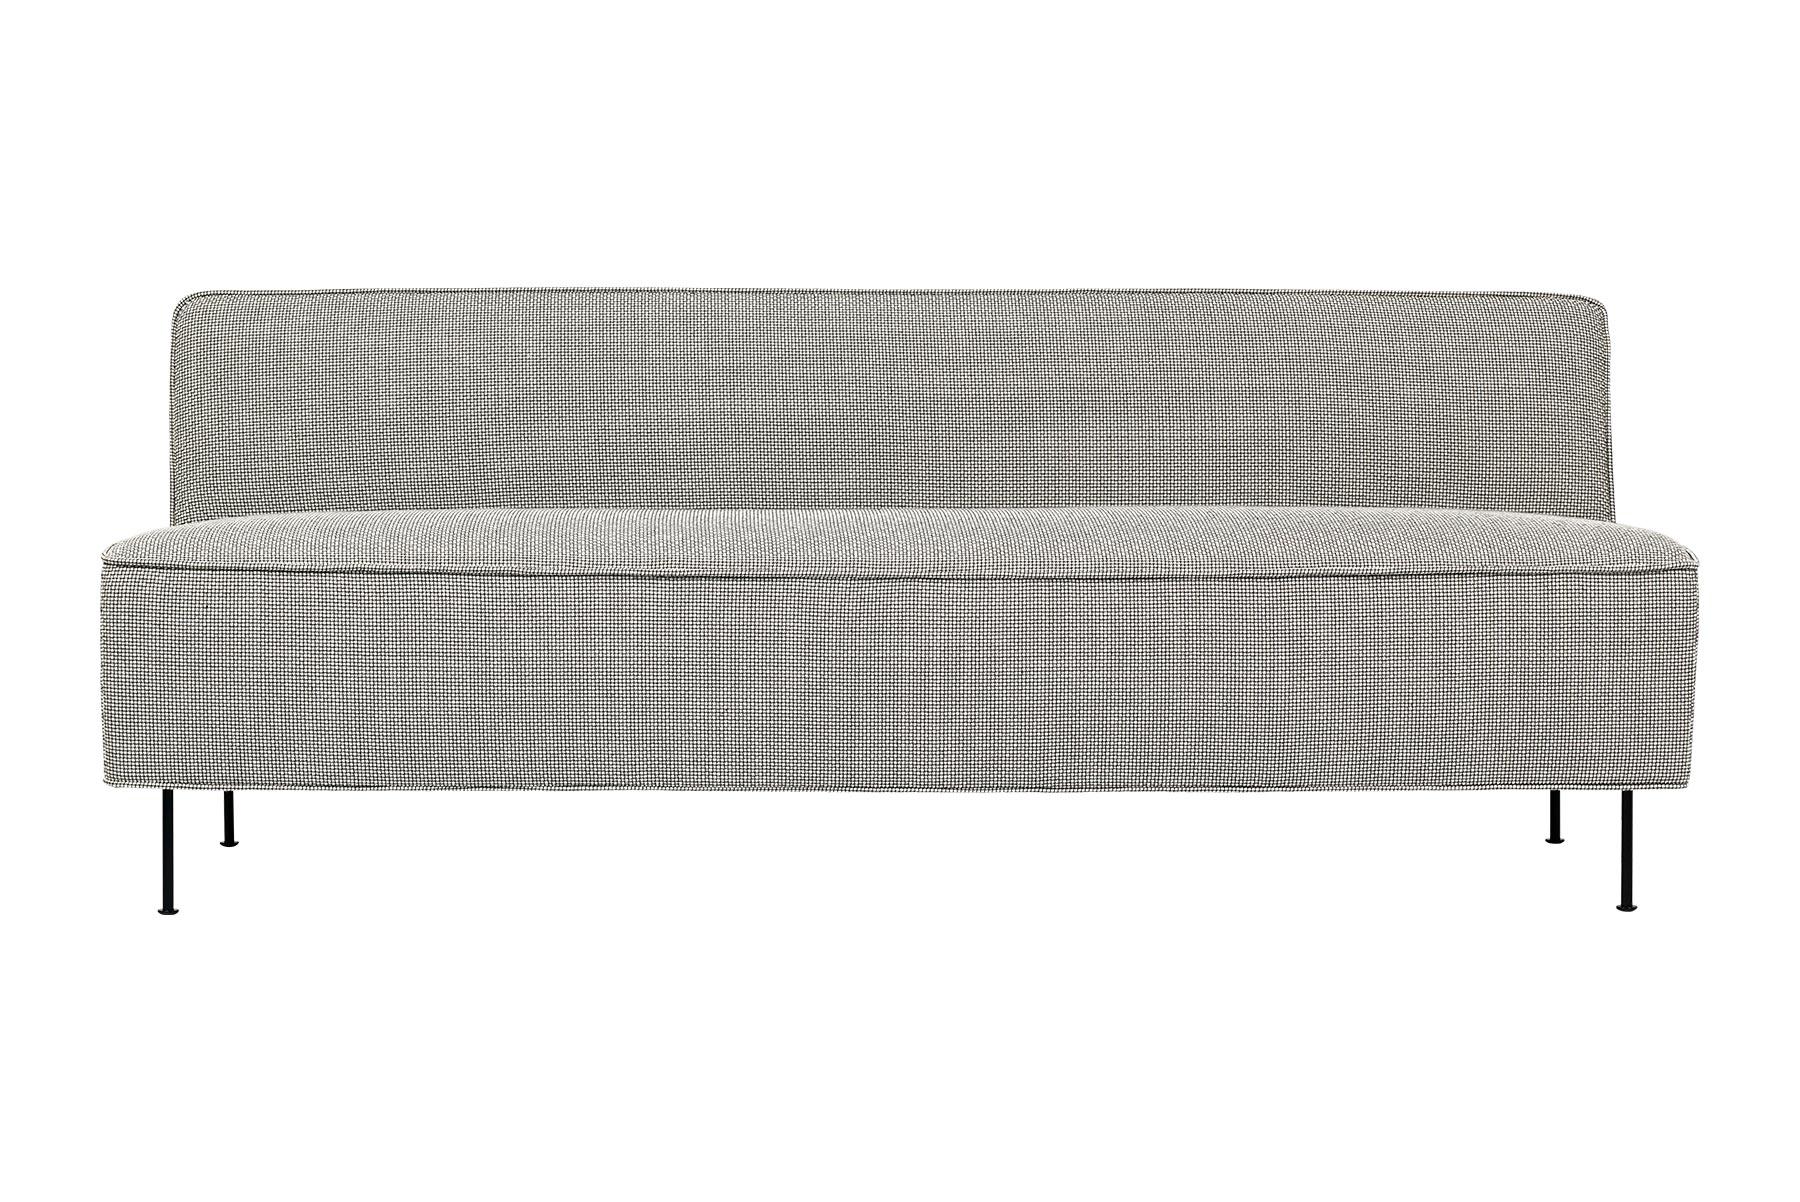 The Modern Line sofa was designed in 1949 by Greta M. Grossman. Modern Line was one of her most elegant and minimalistic designs and was praised in particular for being representative of her background in Scandinavian design. Her timeless sofa